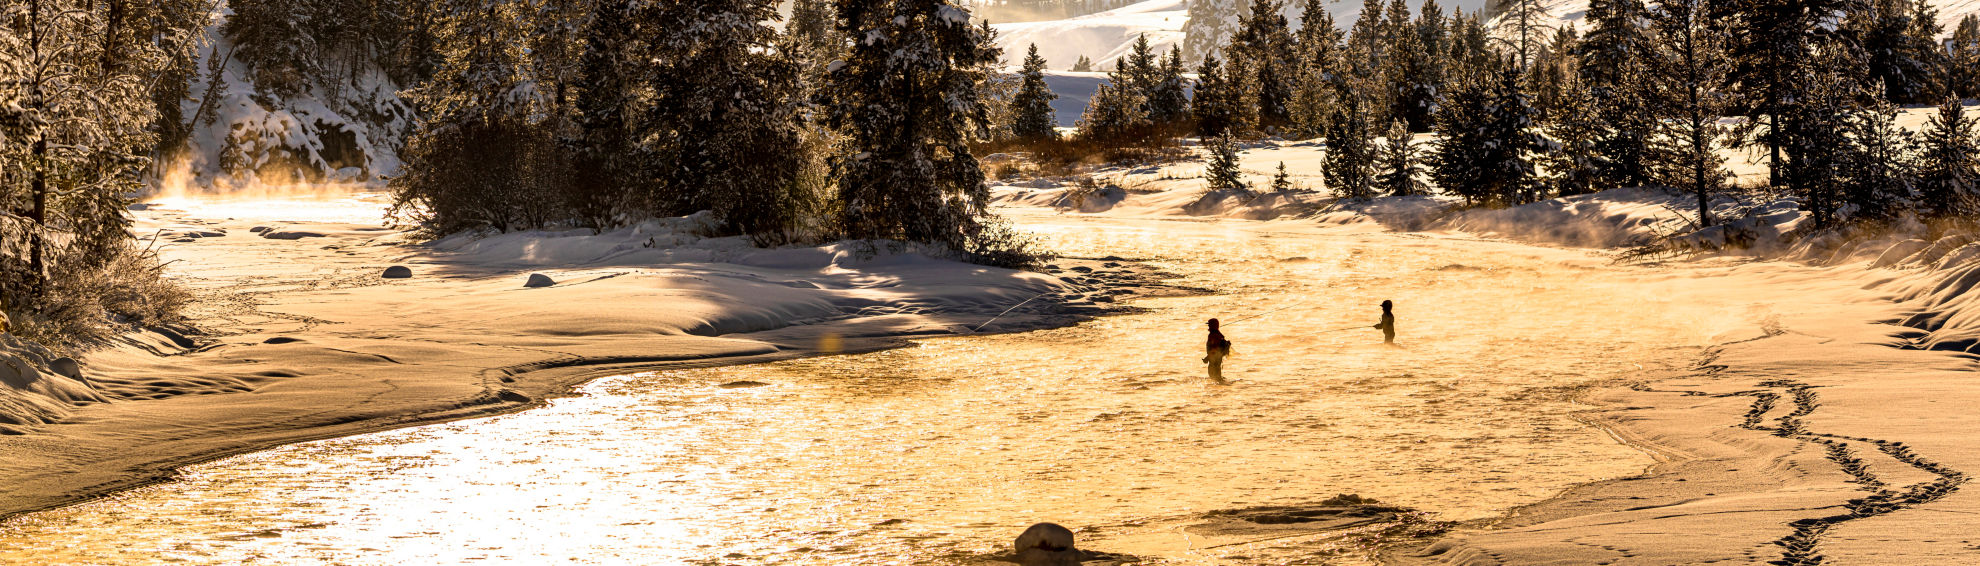 A stunning golden landscape at sunset with two anglers wading into a snowy stream.